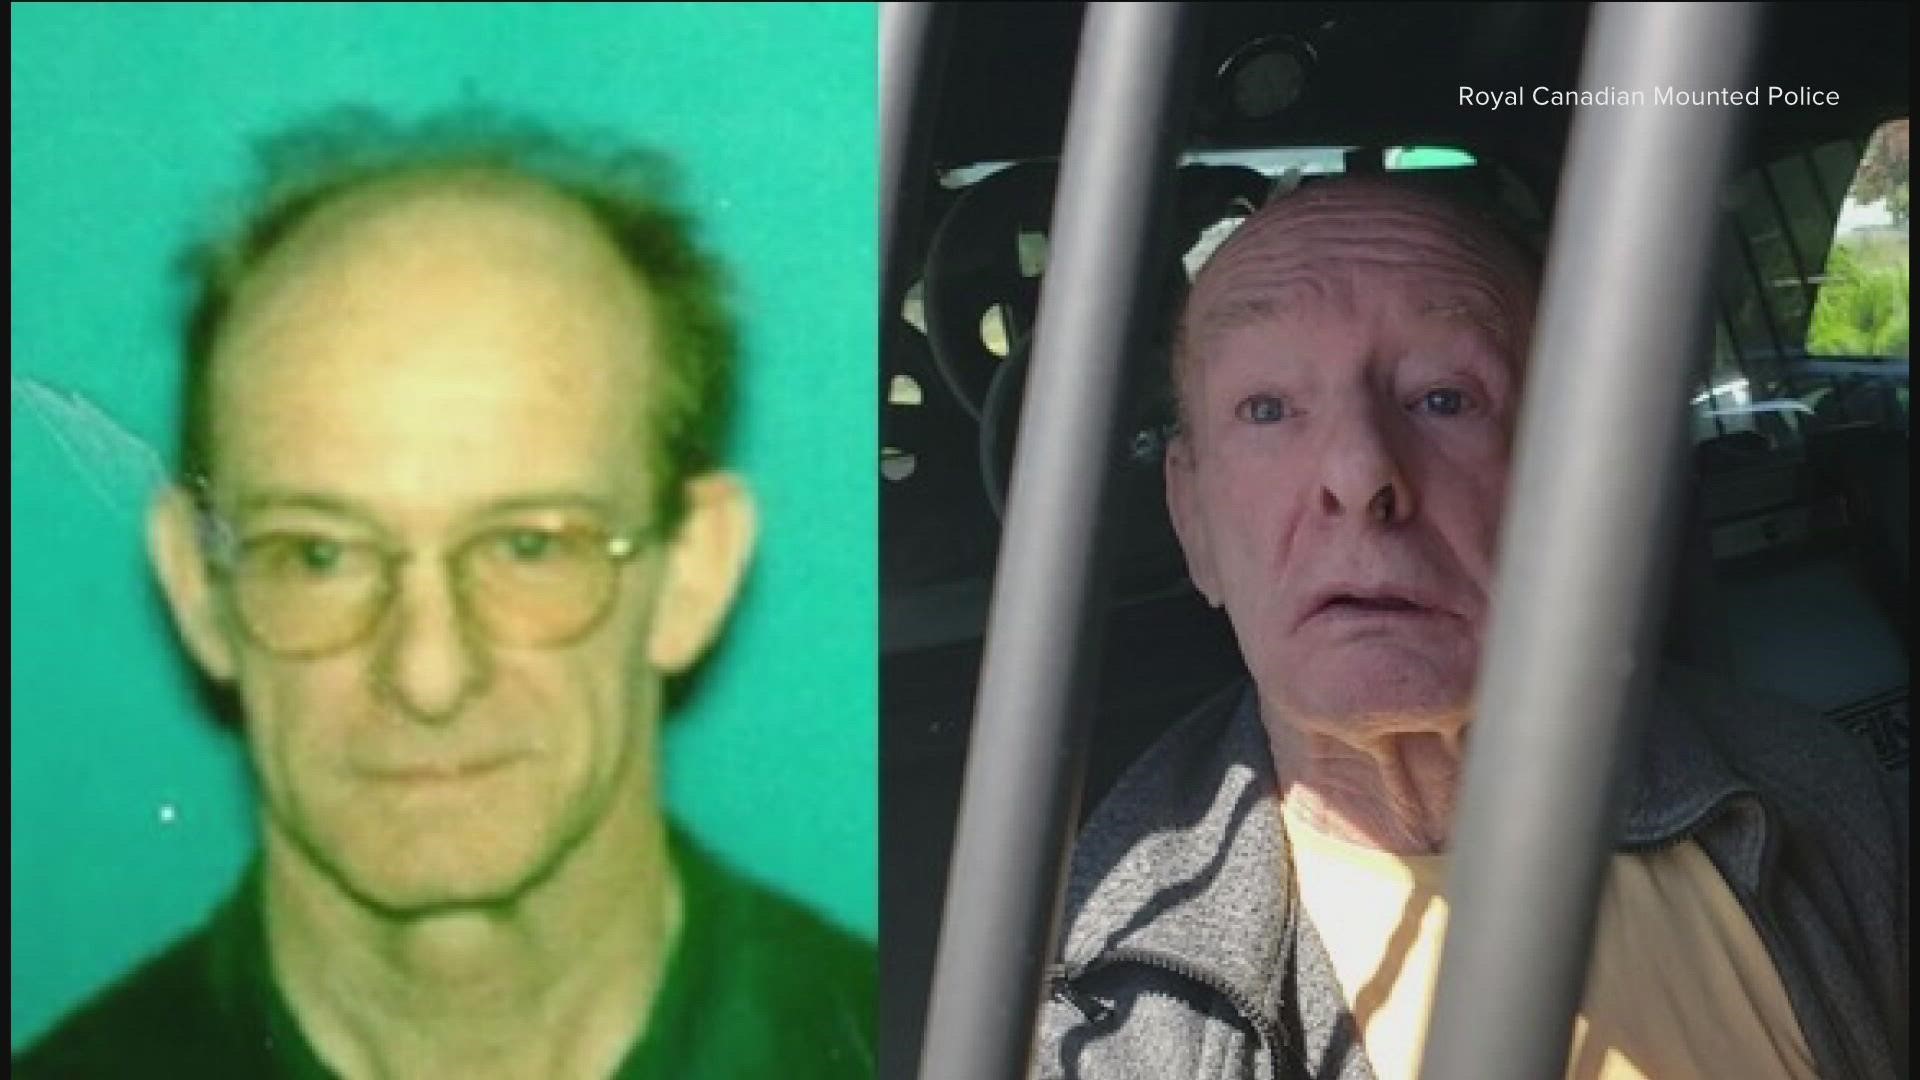 A 77-year-old man was taken into U.S custody on July 25 after fleeing while being out on parole.